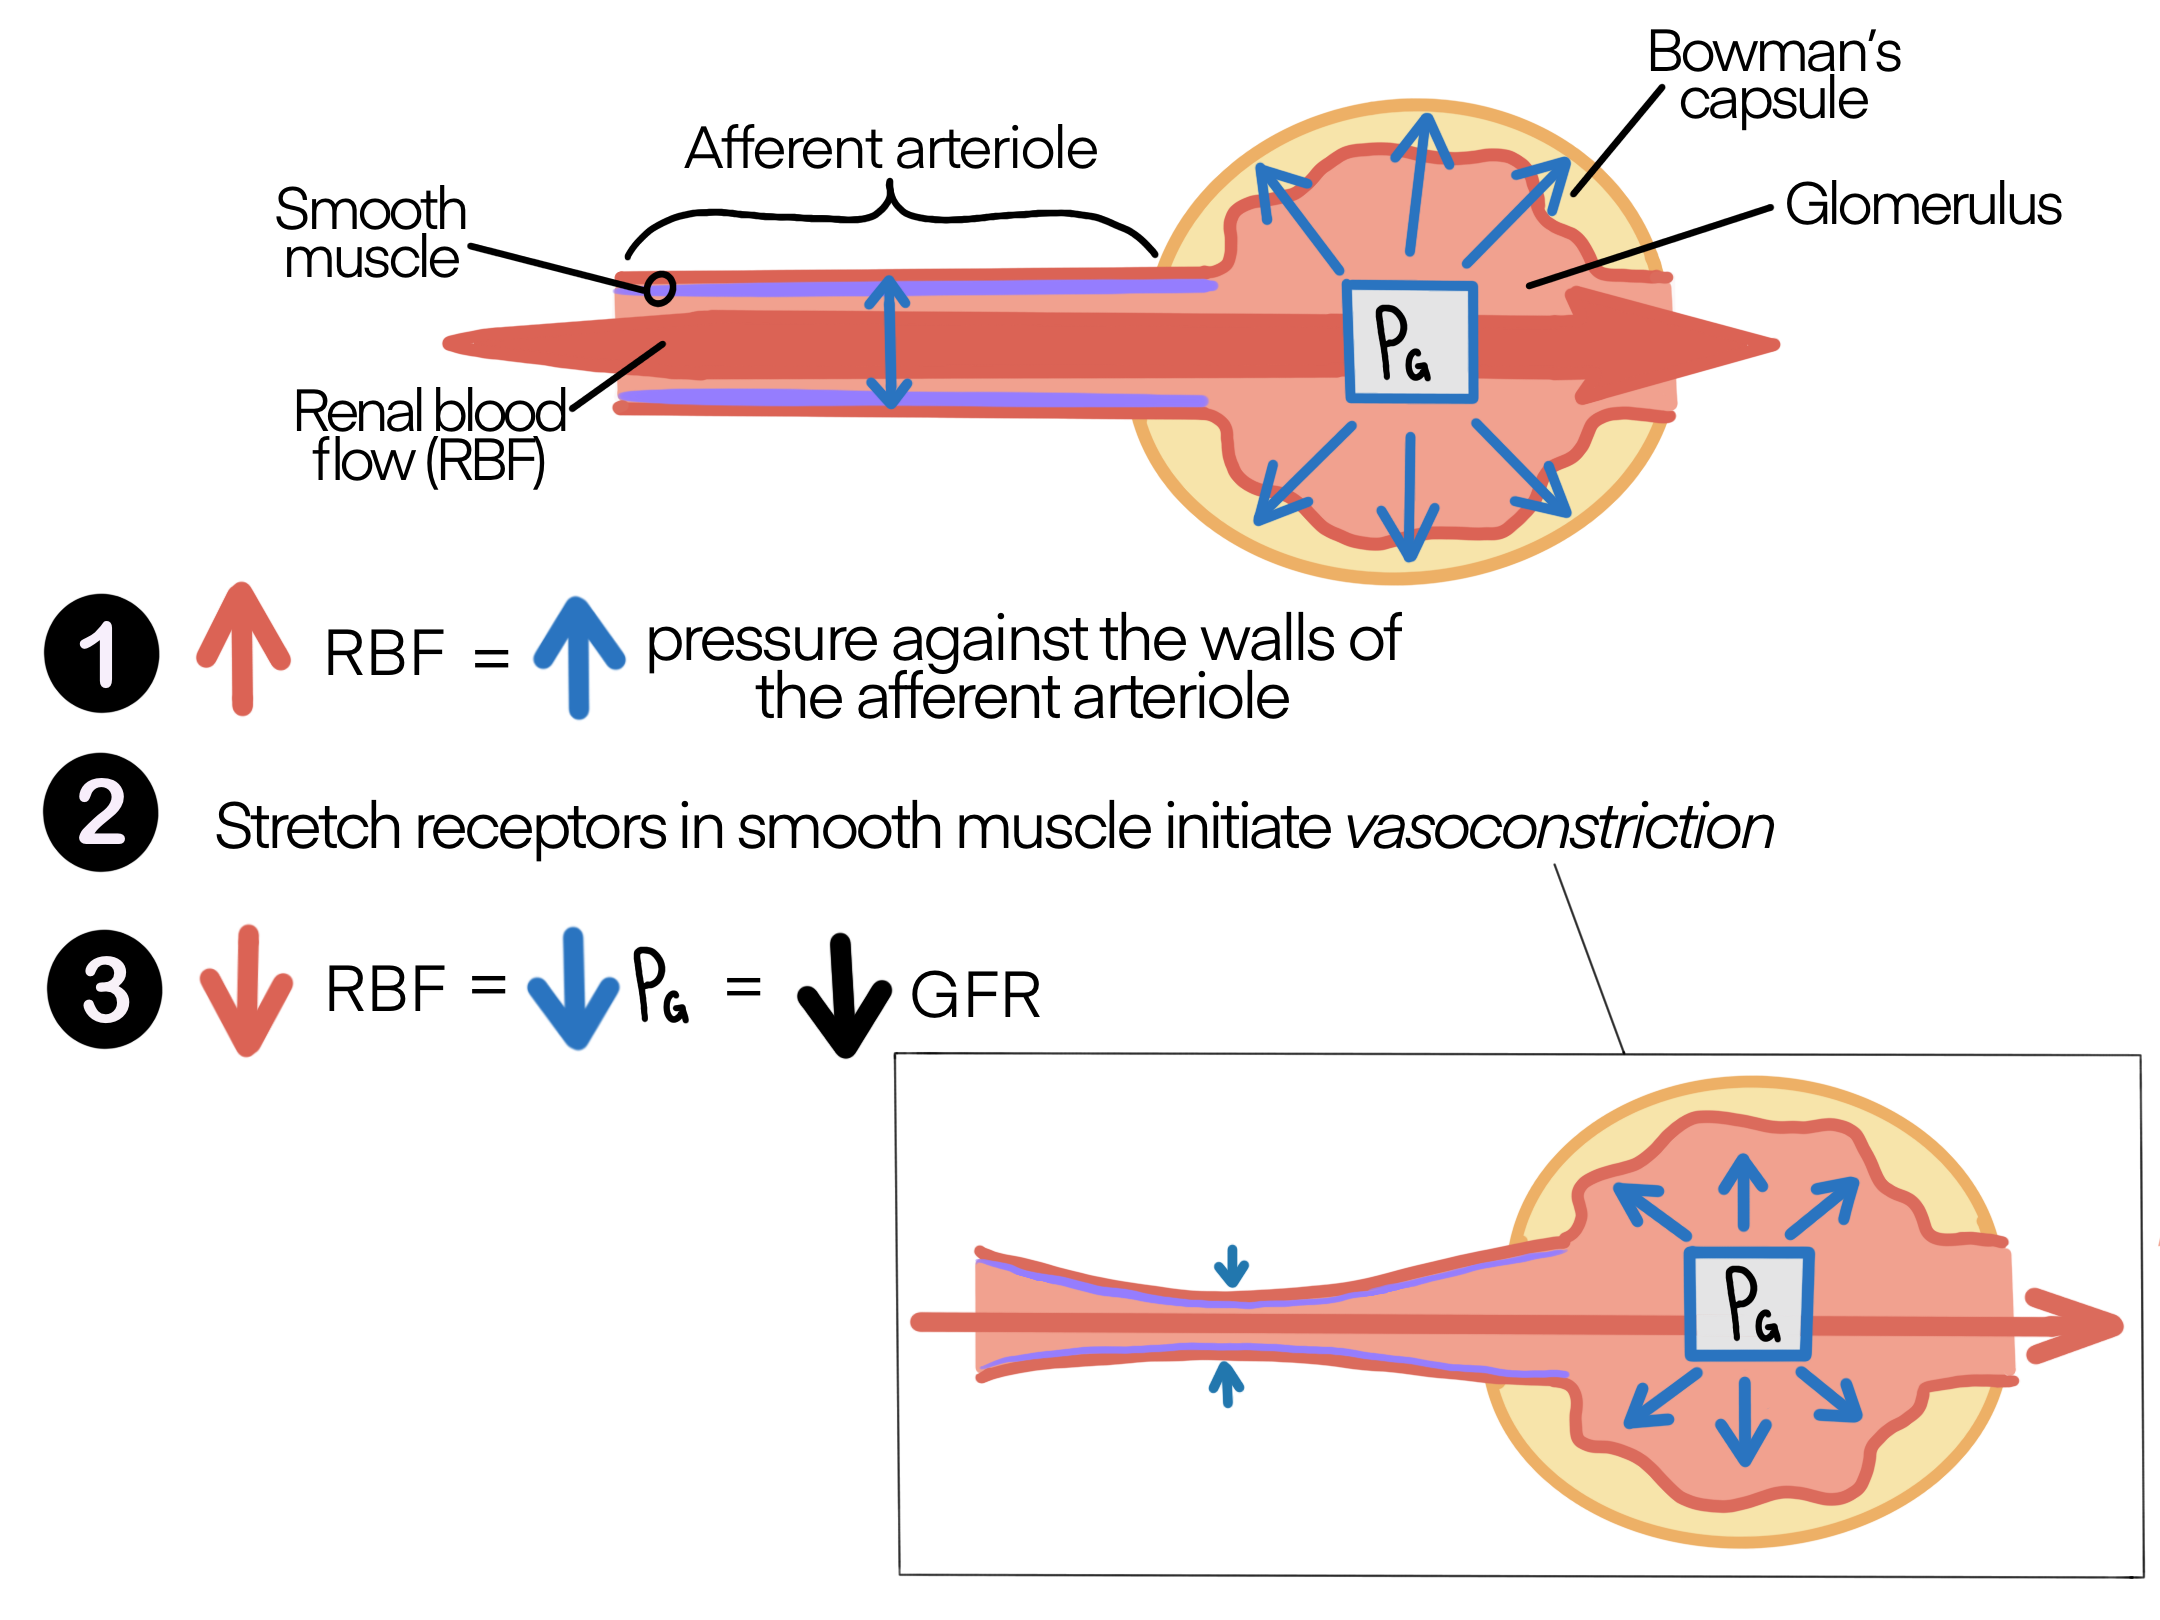 When renal blood flow increases, this will increase pressure against the walls of the afferent arteriole. This will activate stretch receptors in the smooth muscle to initiate vasoconstriction which will decrease renal blood flow, decrease pressure in the glomerulus and decrease GFR. This is known as the myogenic response.